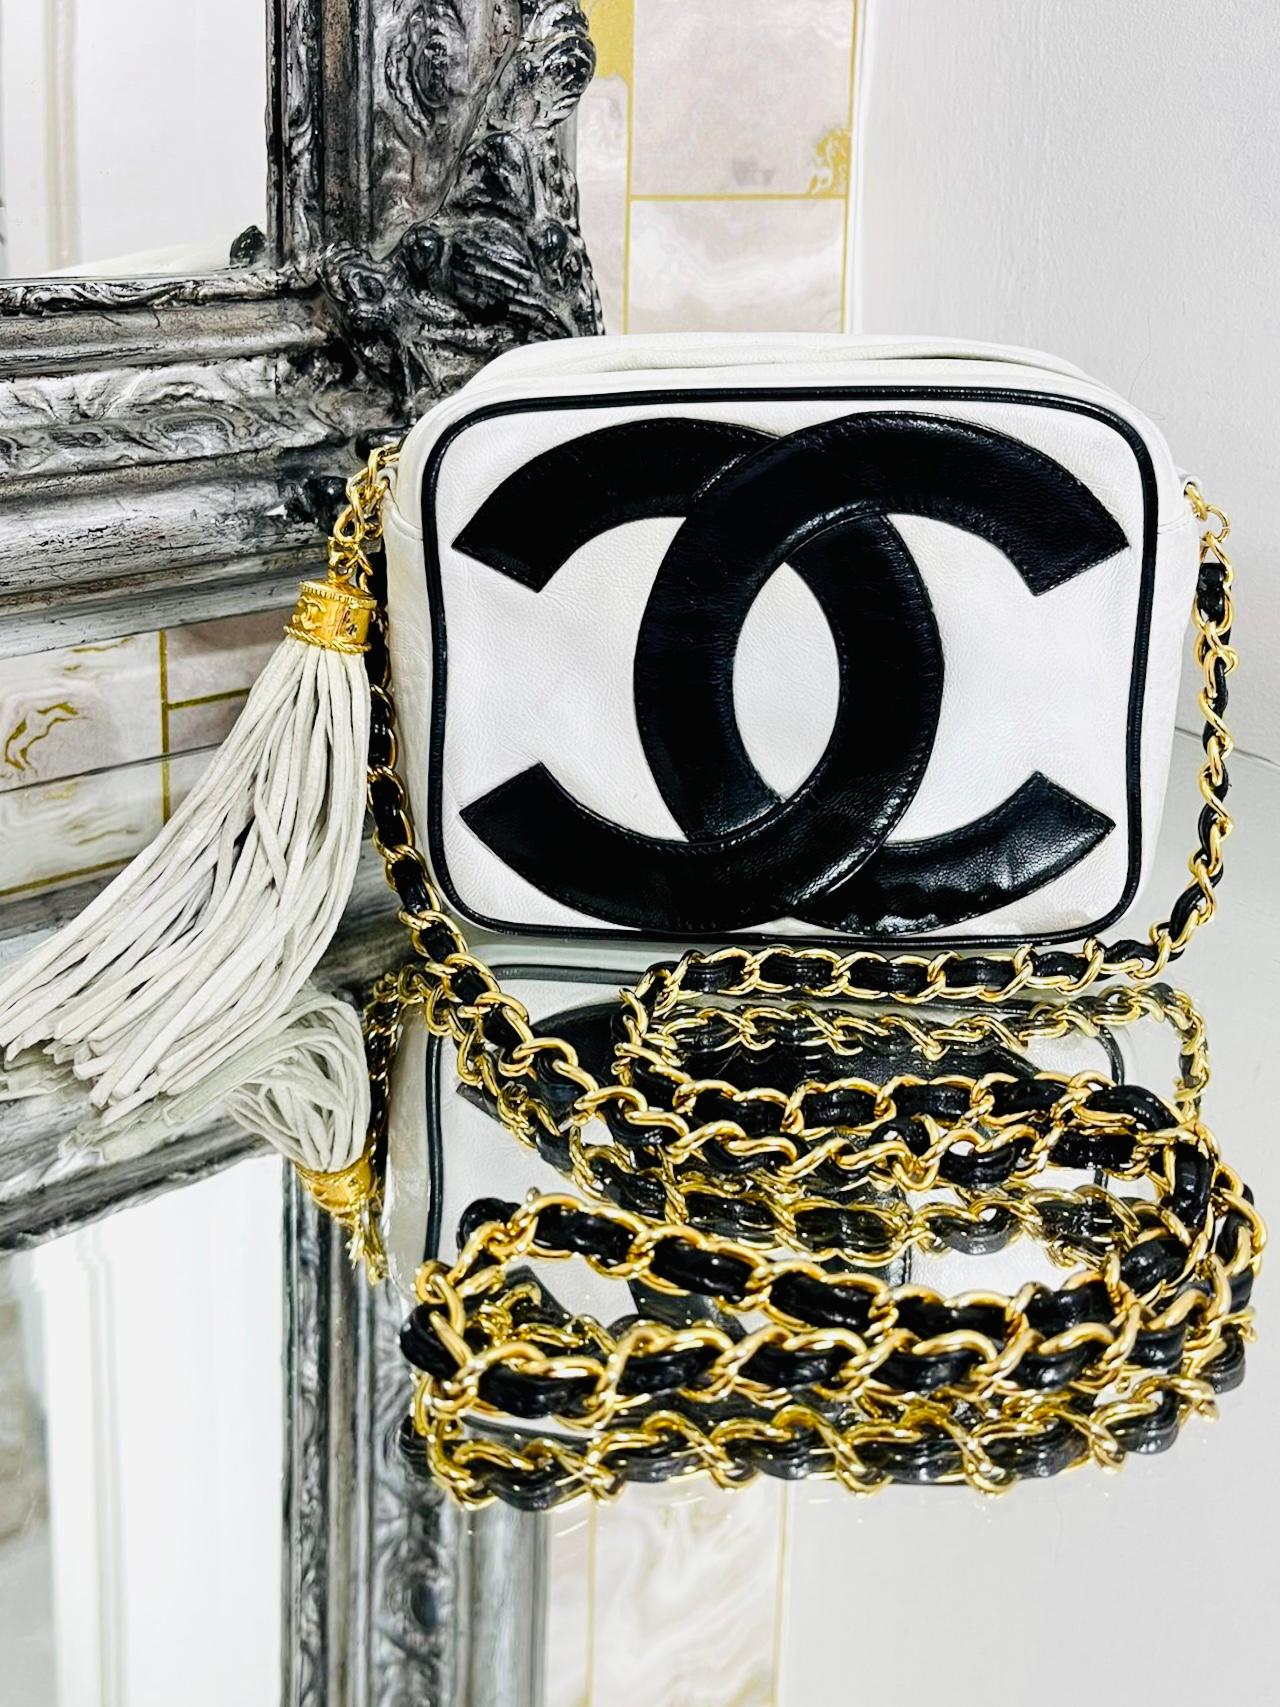 Very Rare - Chanel Vintage Leather Double 'CC' Logo Camera Bag

White quilted leather, crossbody bag with large black 'CC' logo

to both sides. 24k Gold plated hardware. Logo cap tassel to one side

and iconic chain and contrasting black leather